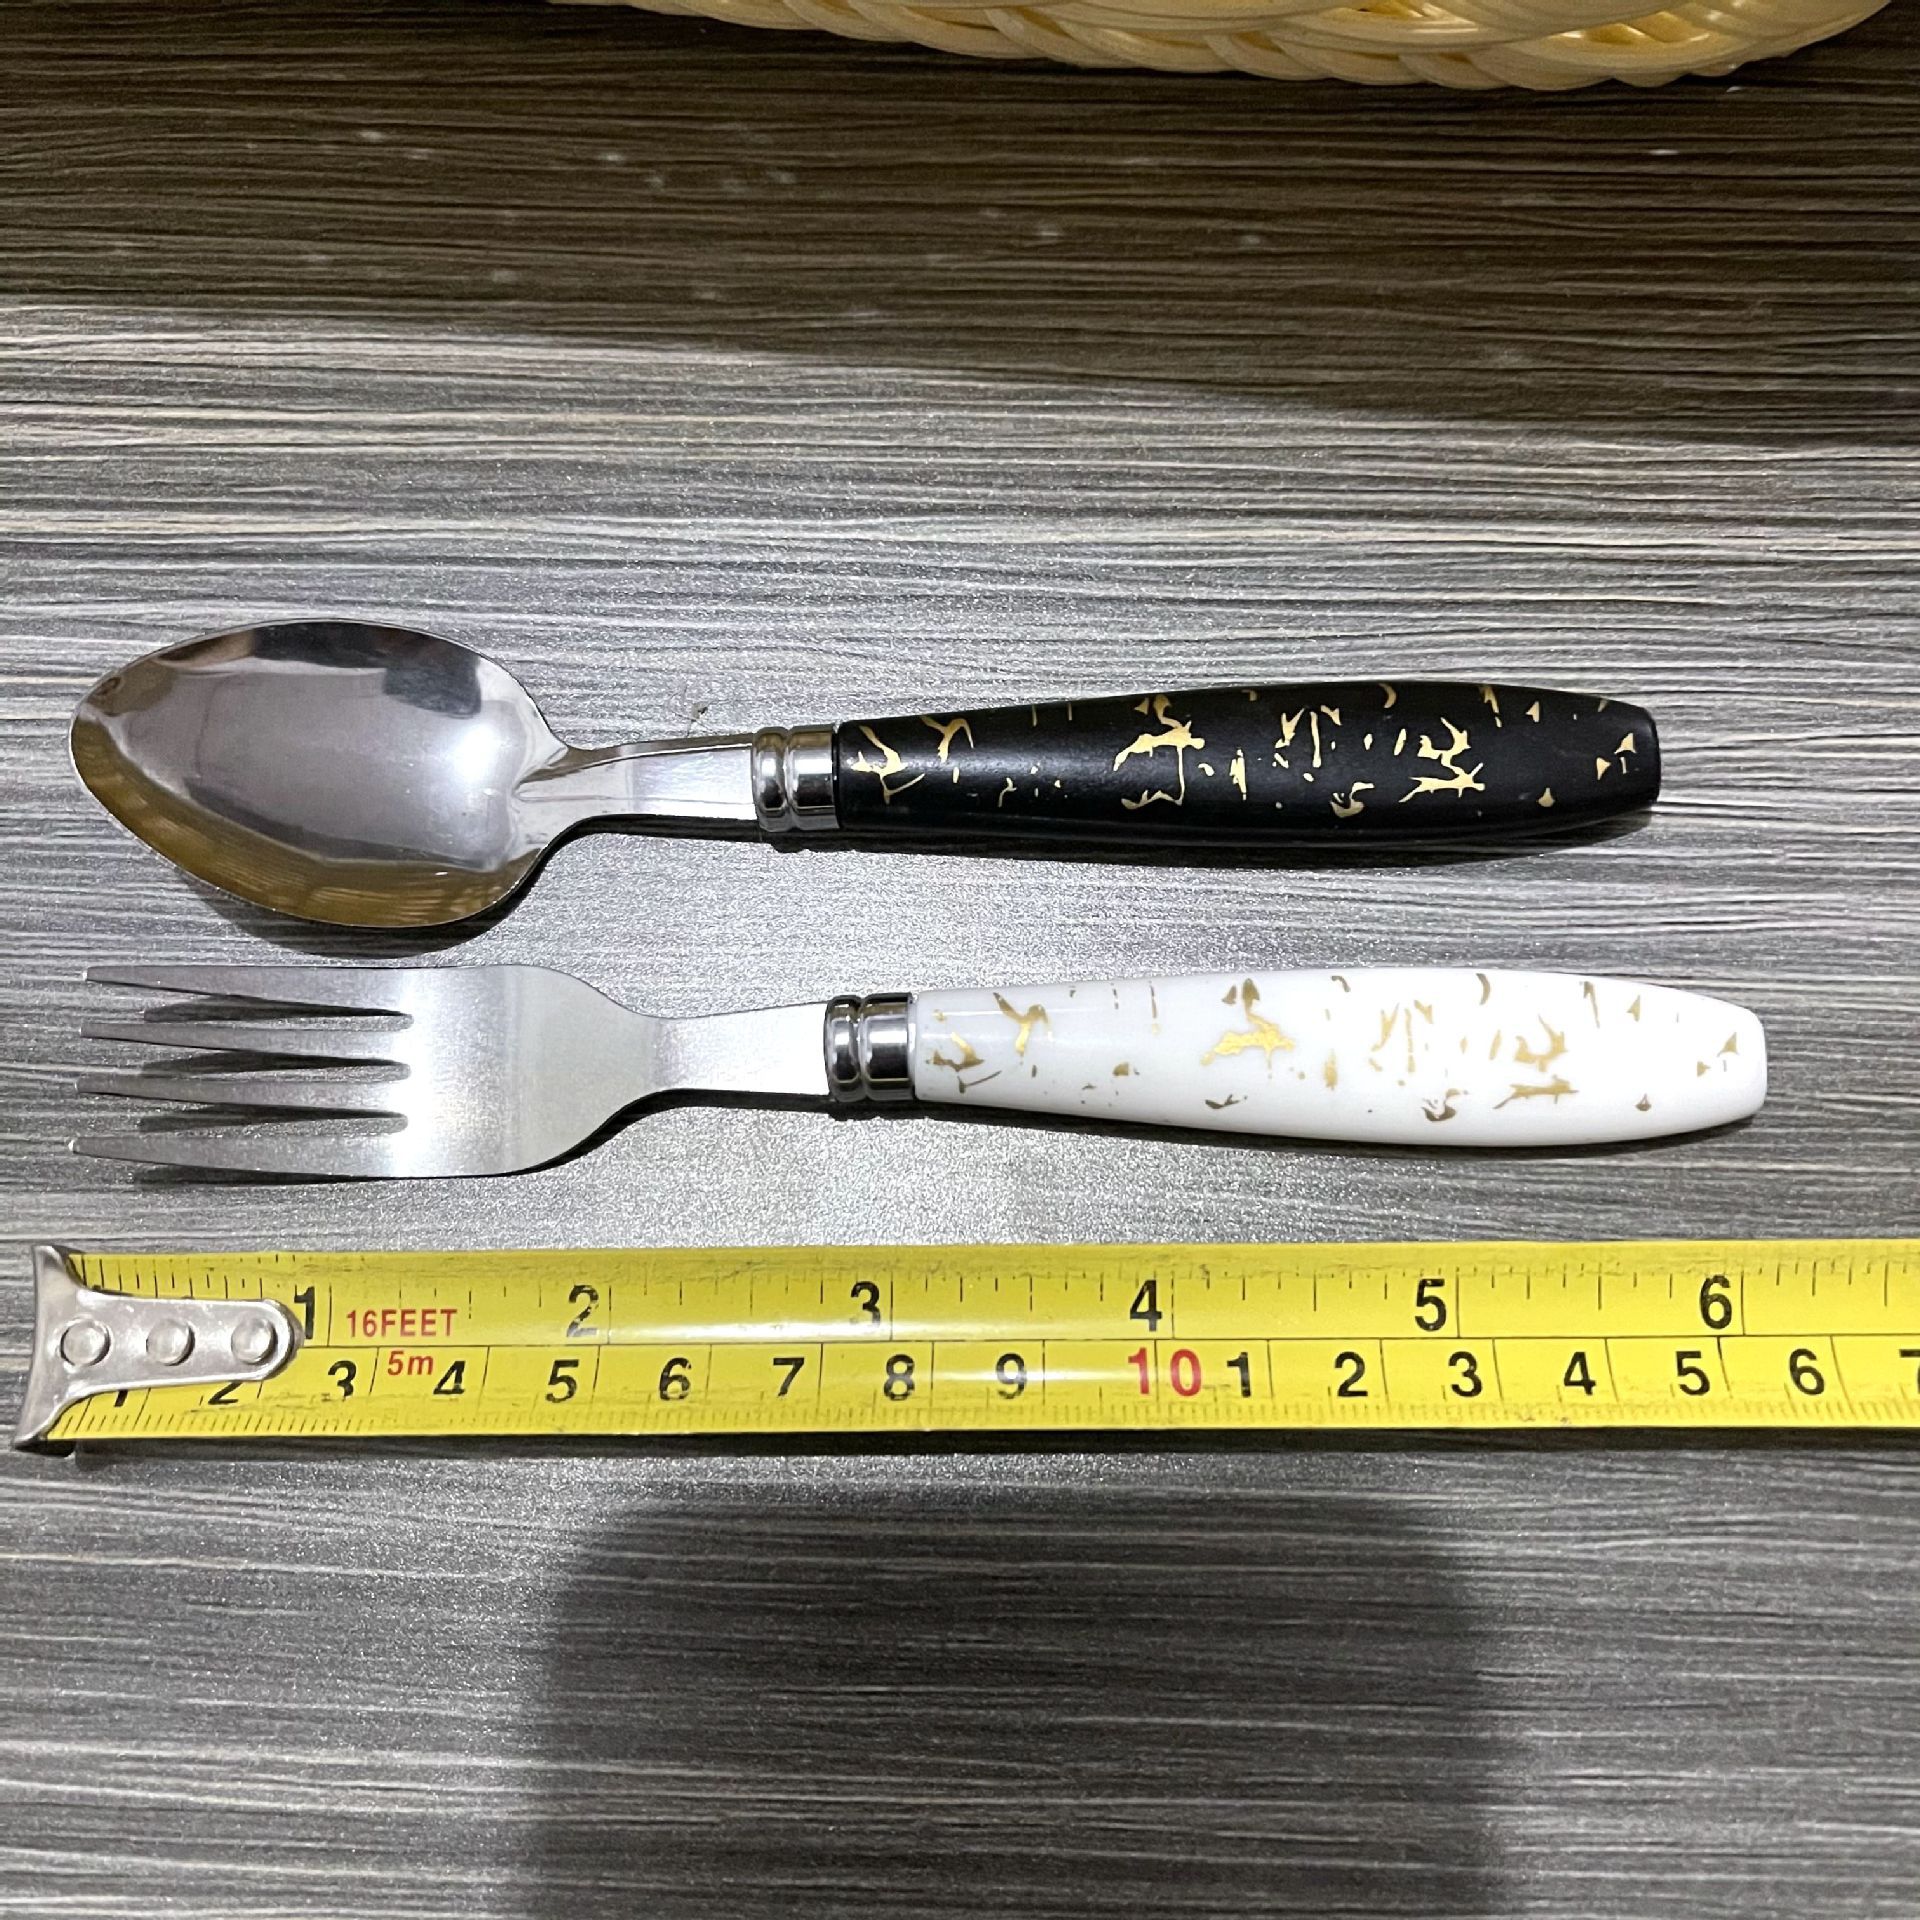 Leopard Print Spoon Fork Student Spoon Fork Child's Spoon and Fork Spoon Fork Plastic Handle Spoon Plastic Handle Spoon 1 Yuan Supply Gift Supply